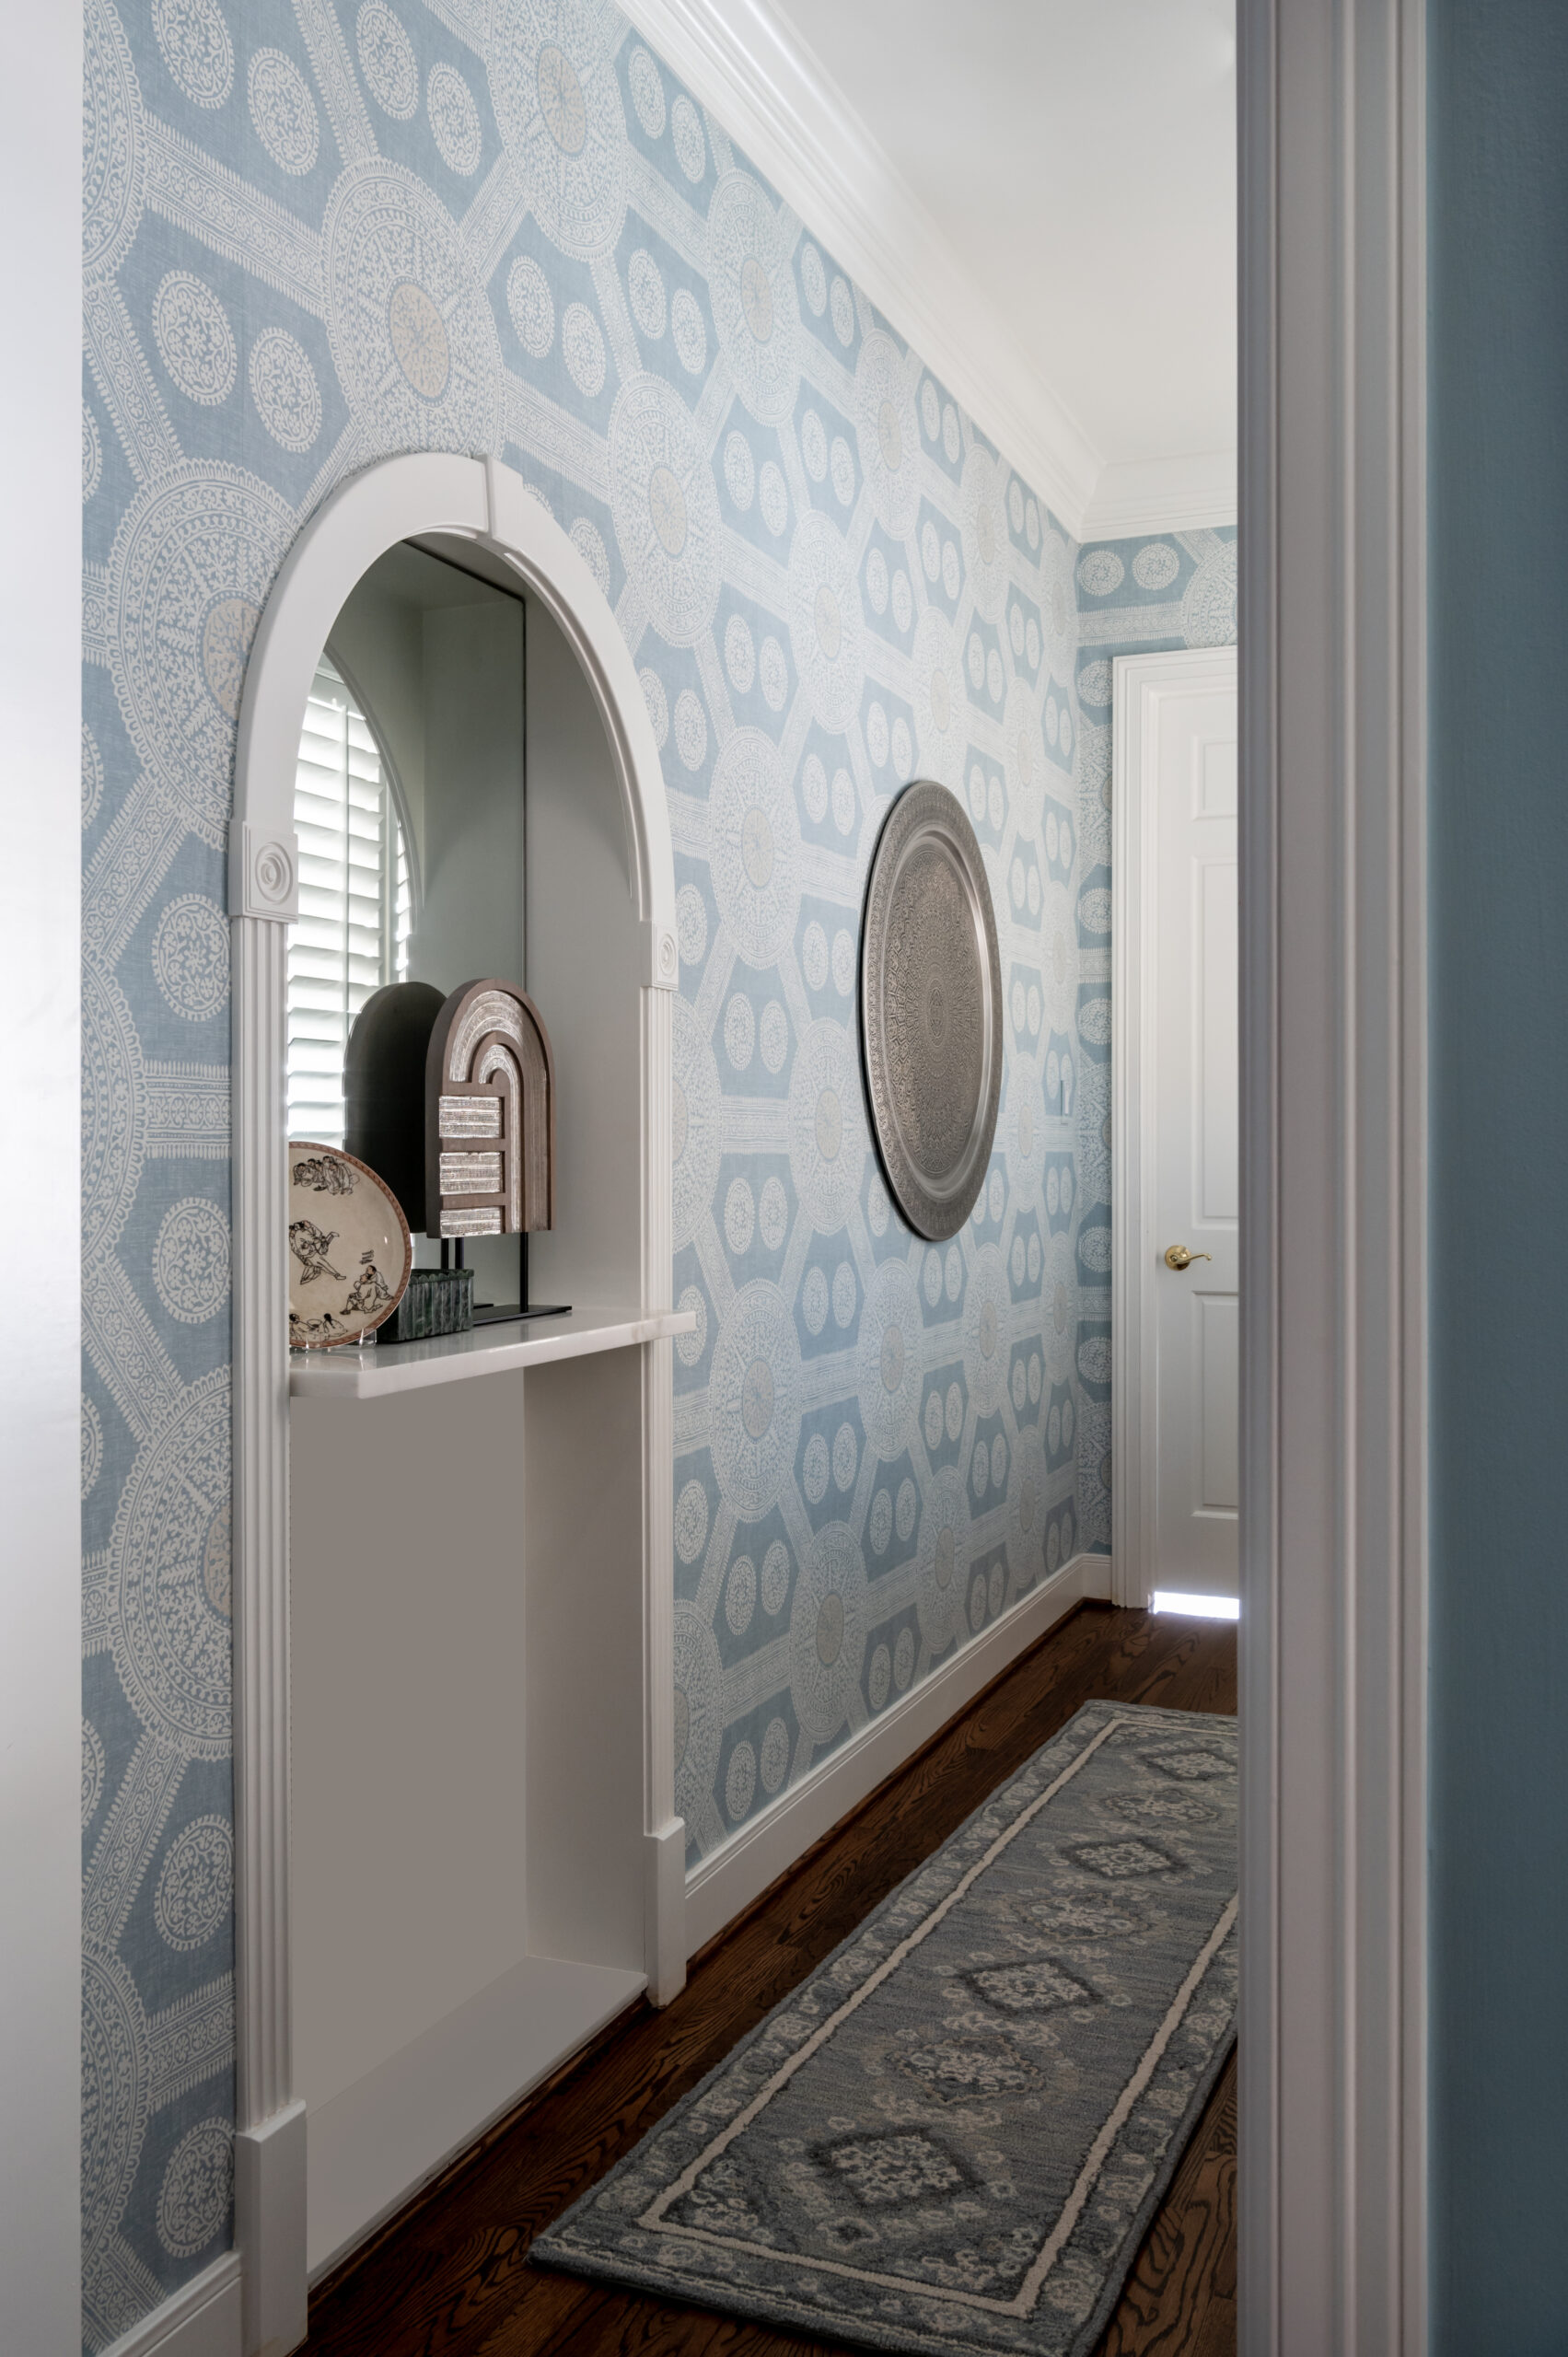 Hallway interior design photo of gorgeous blue wallpaper and styled shelves